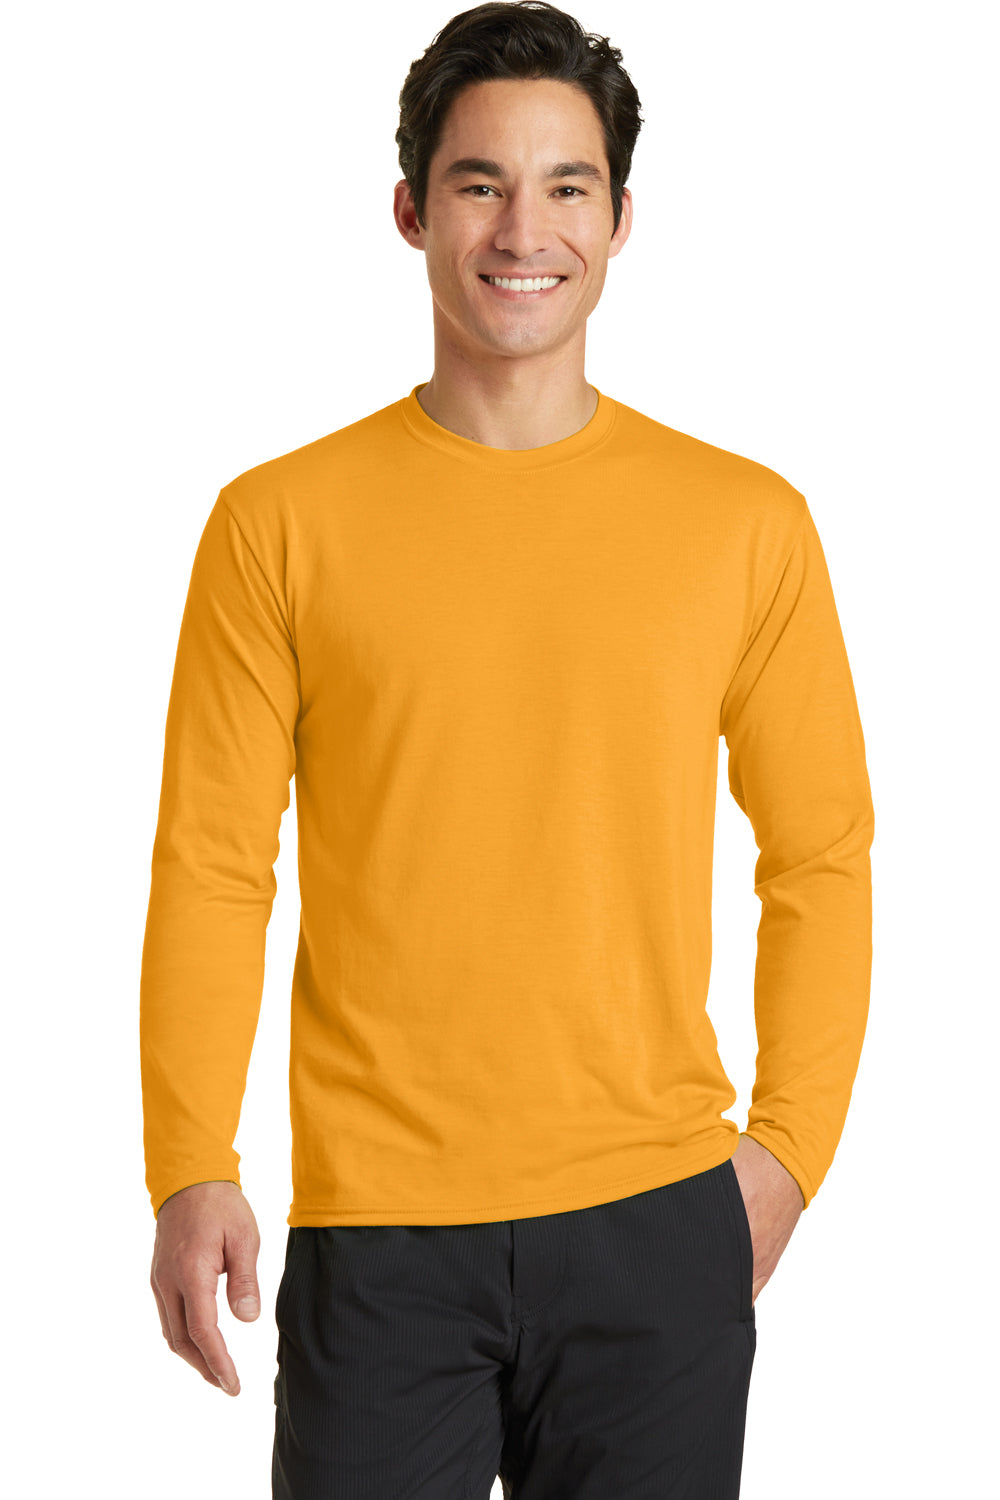 Port & Company PC381LS Mens Dry Zone Performance Moisture Wicking Long Sleeve Crewneck T-Shirt Gold Front